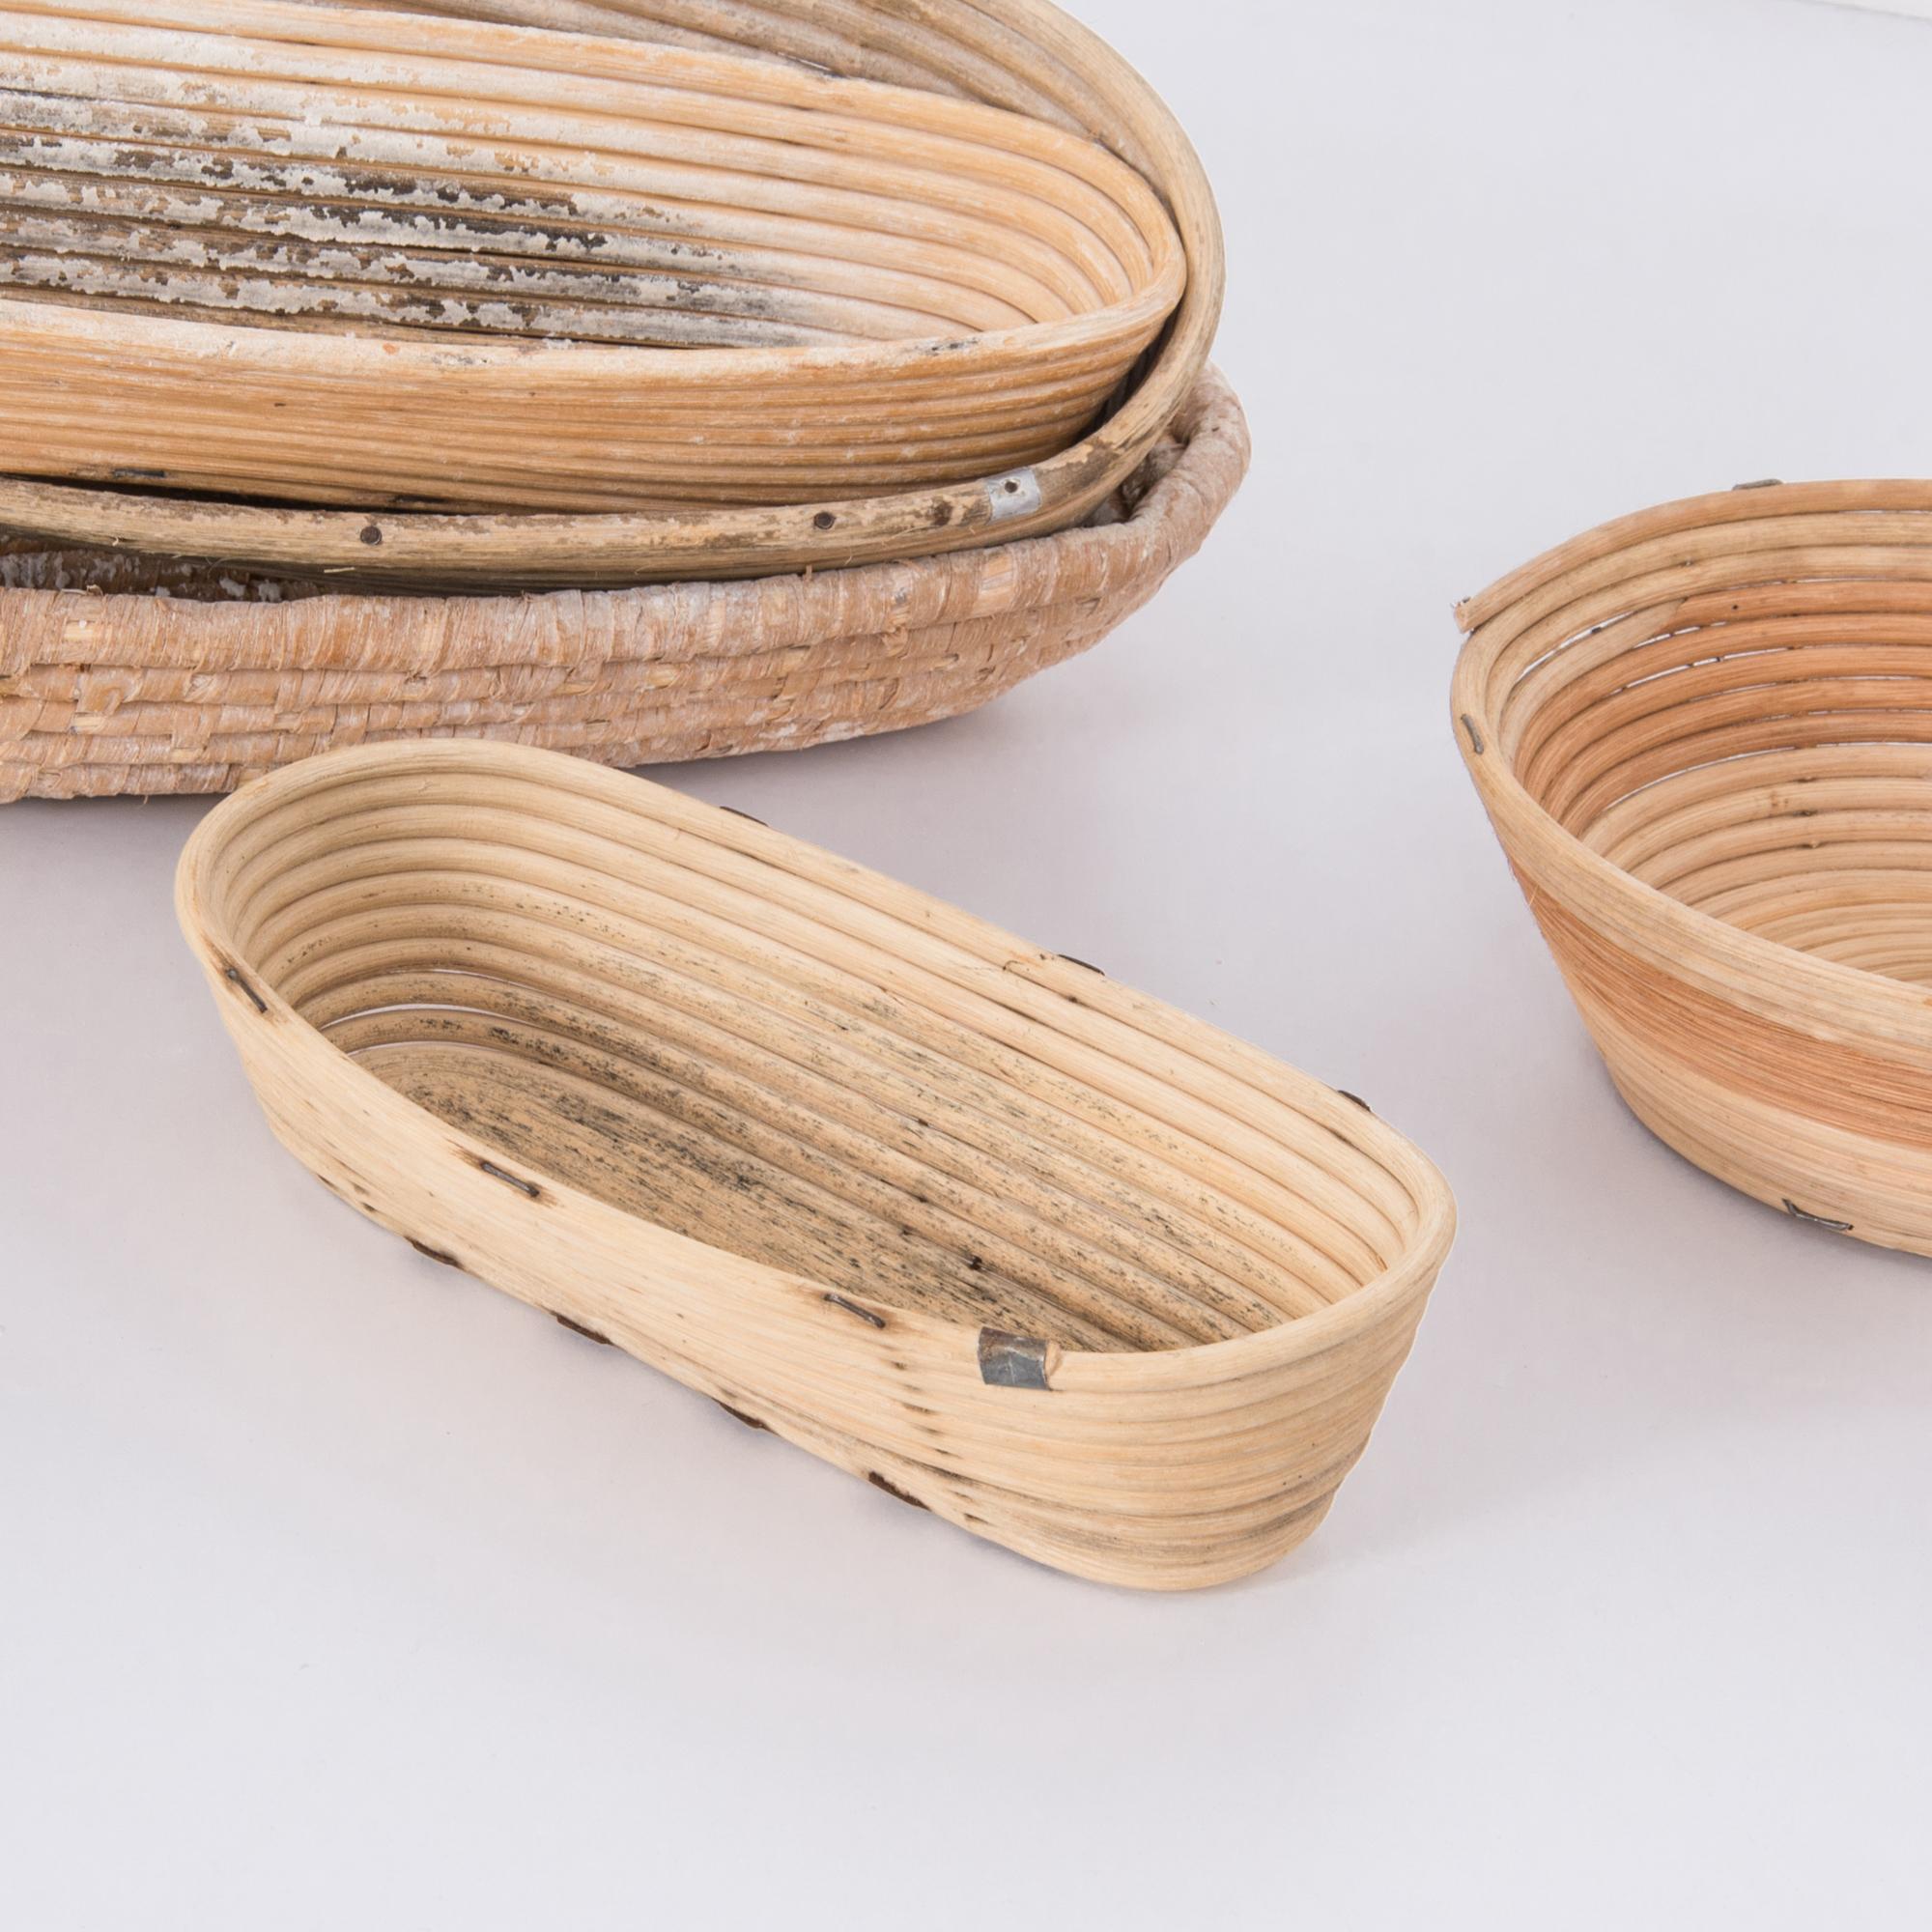 Country Rustic French Bread-Proofing Baskets, Set of Five